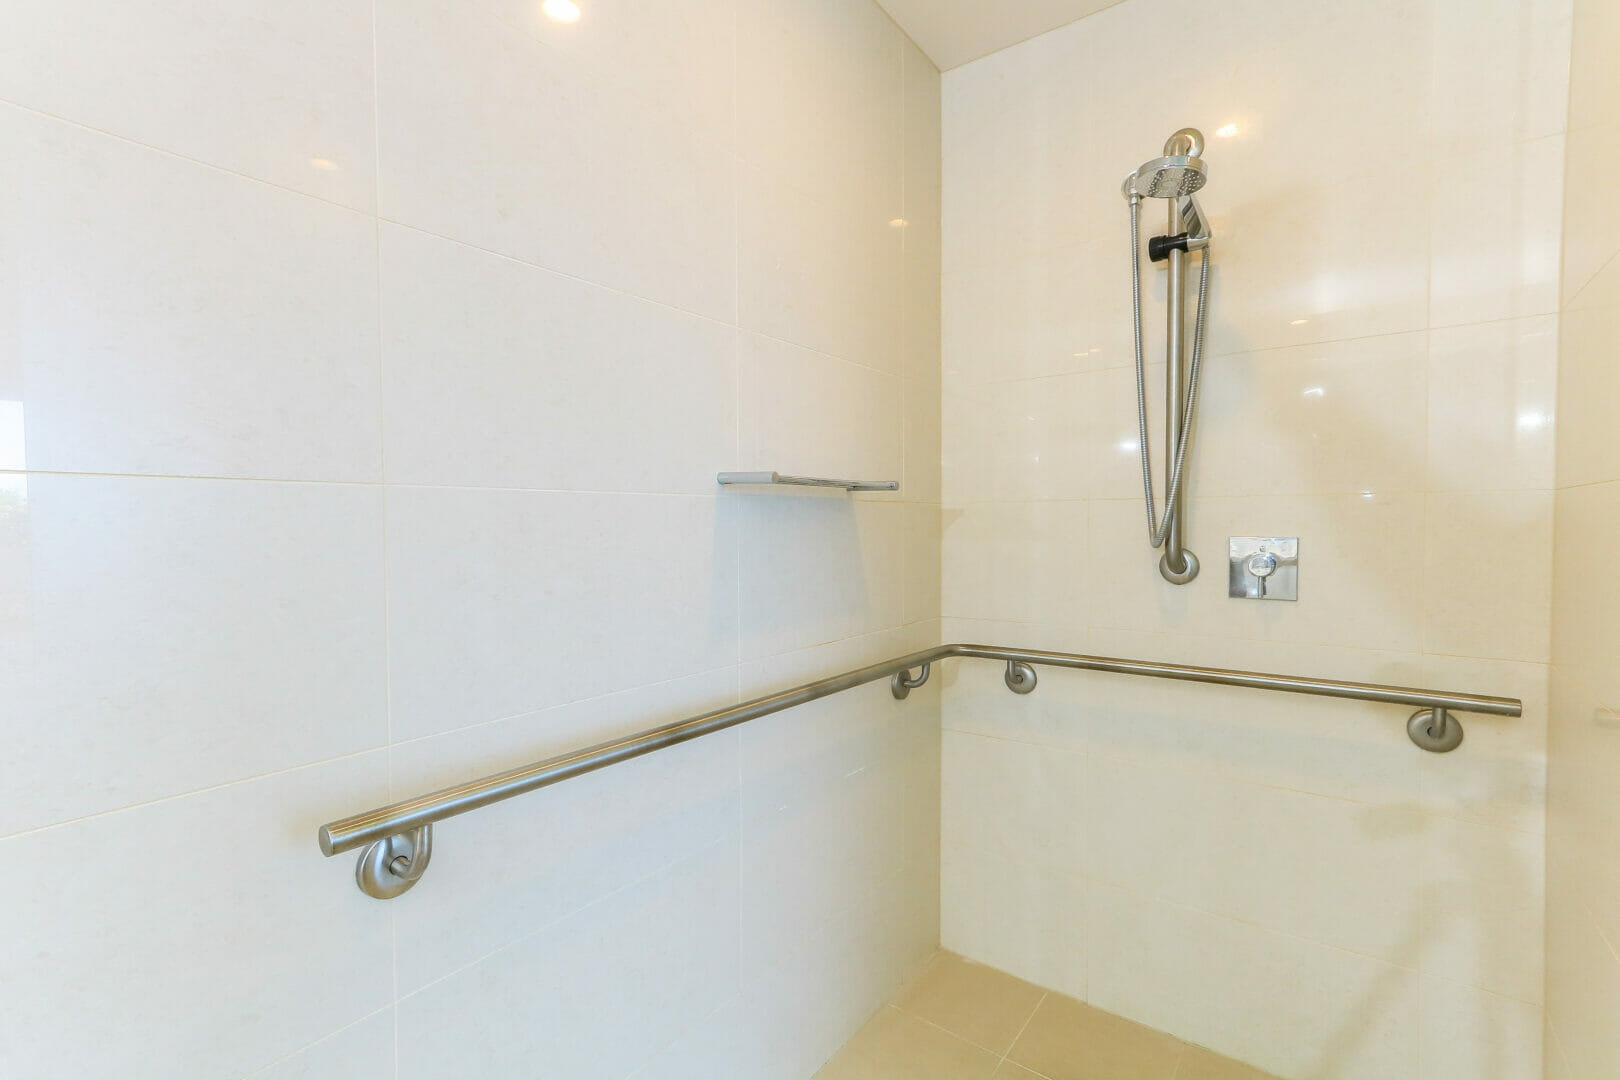 Accessible bathroom with shower rails